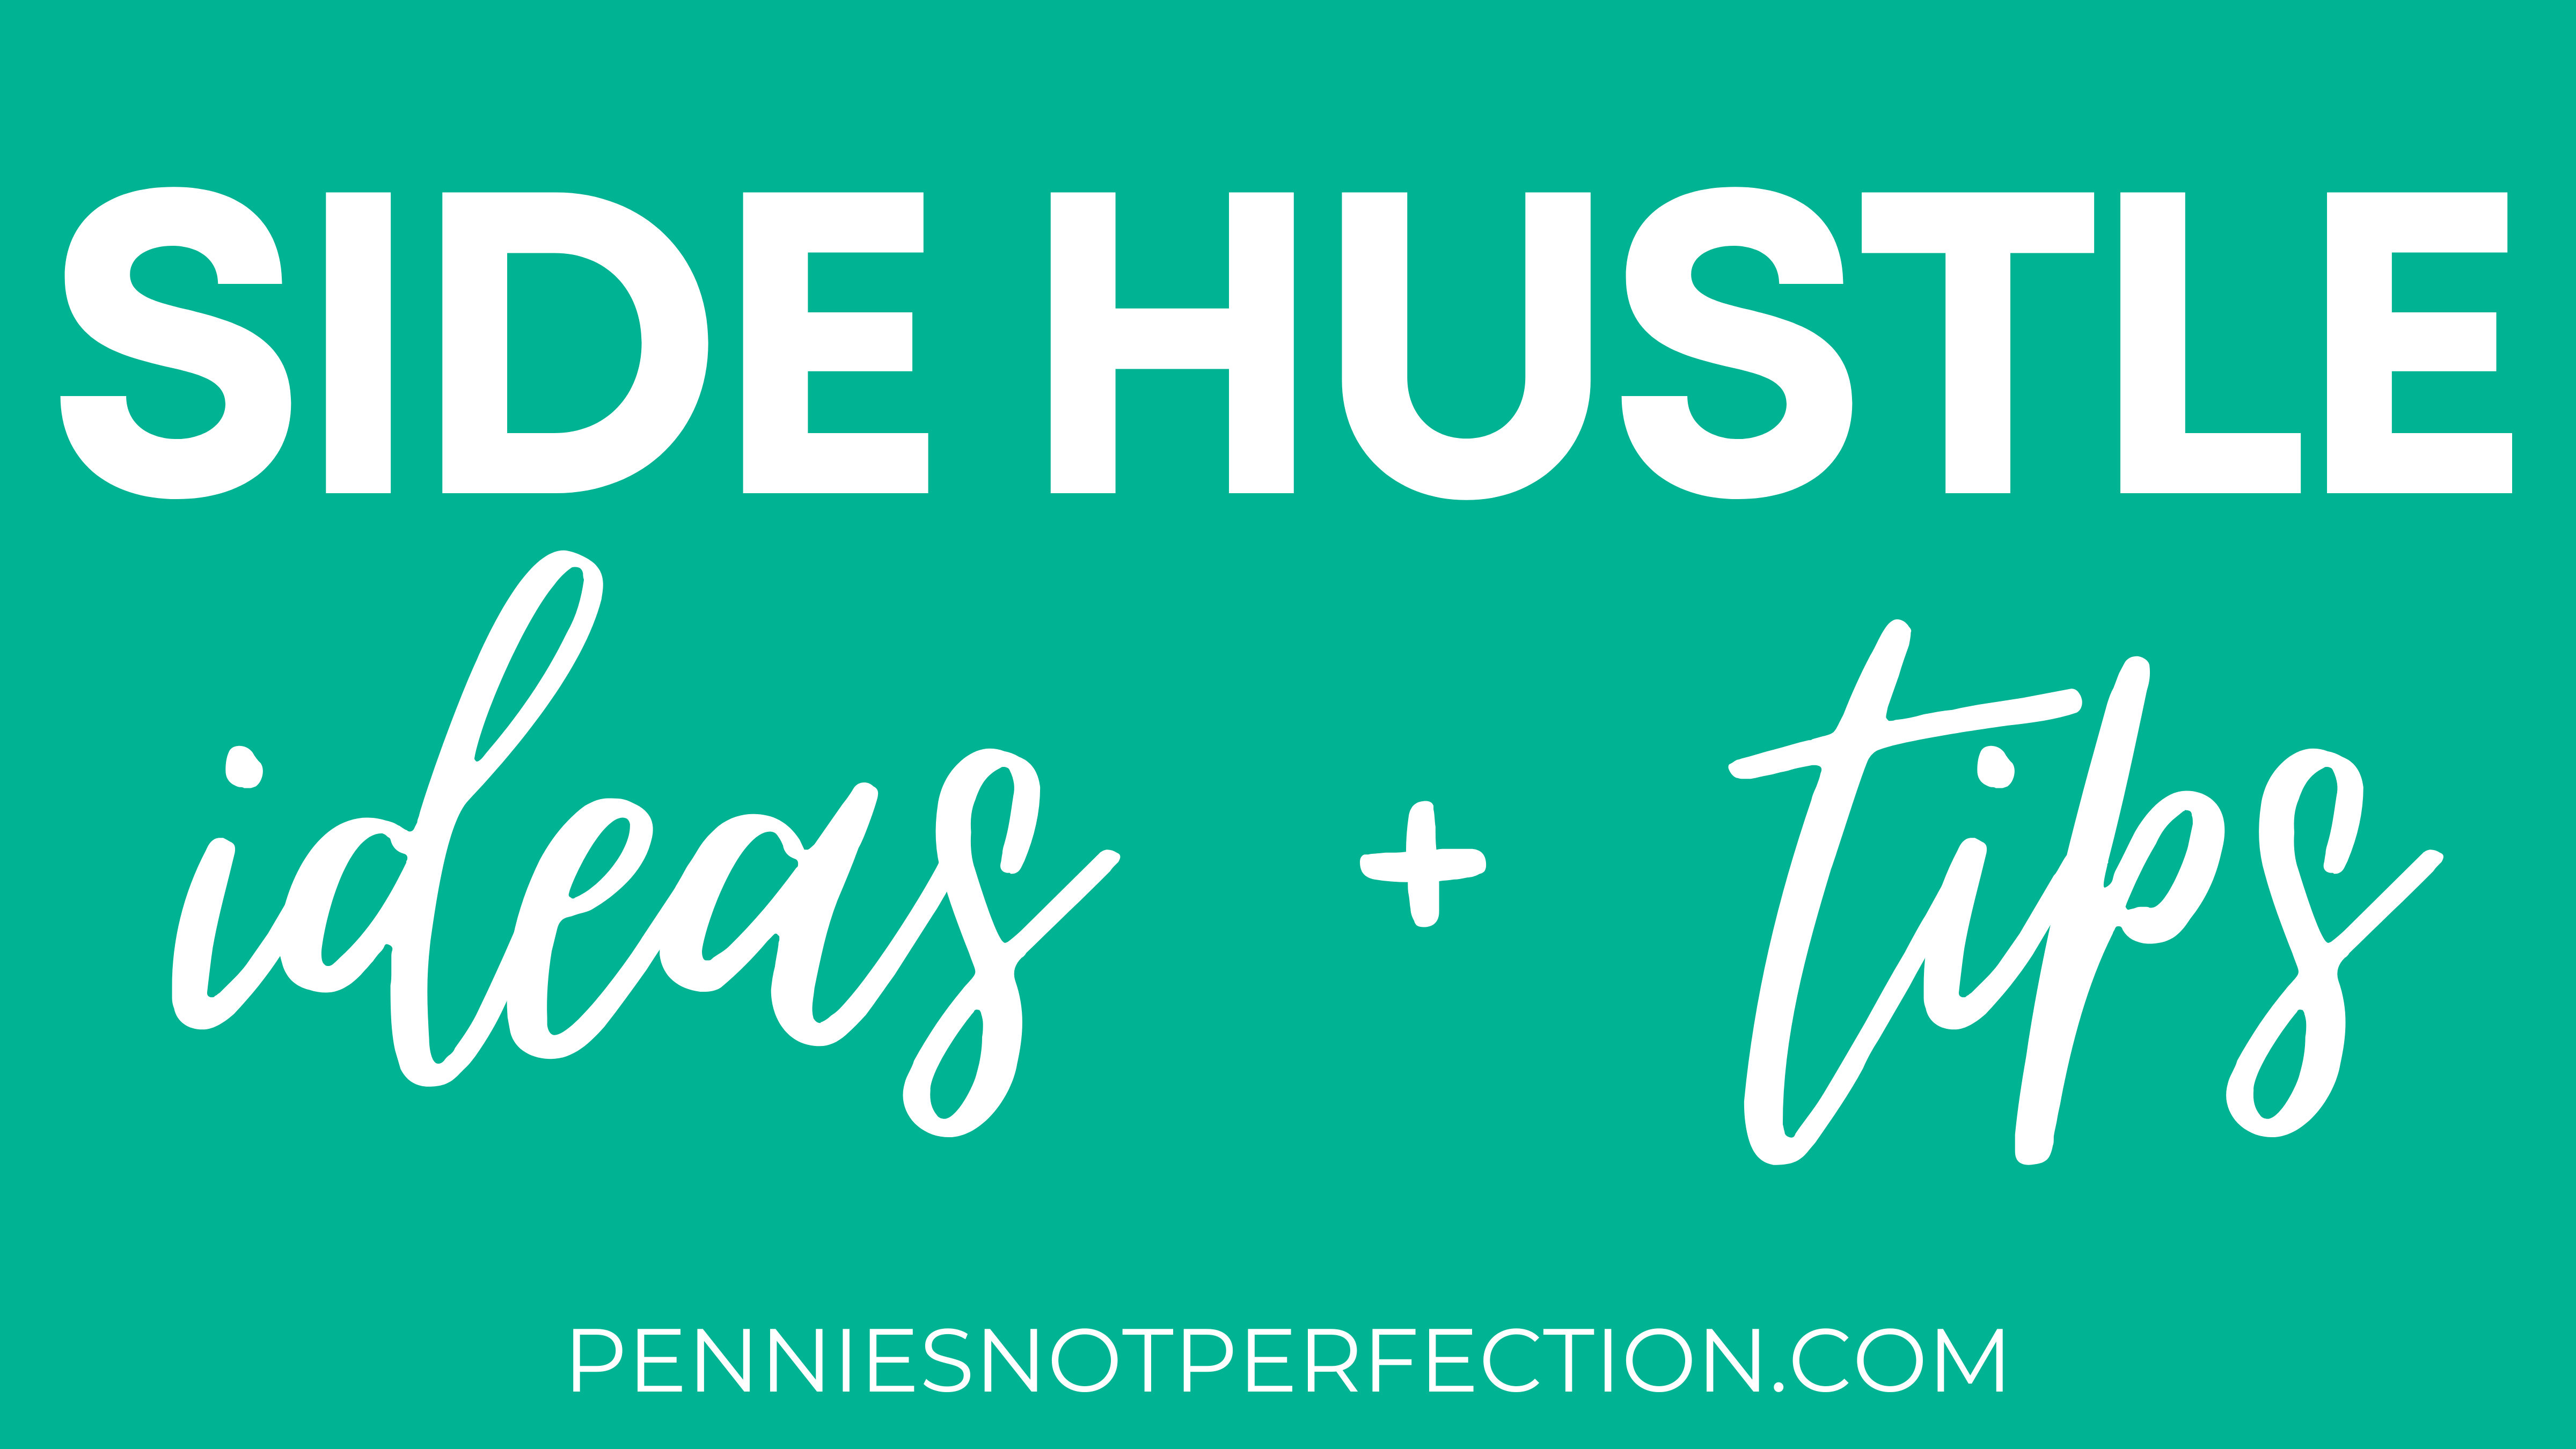 Side Hustle Ideas + Tips from Pennies Not Perfection